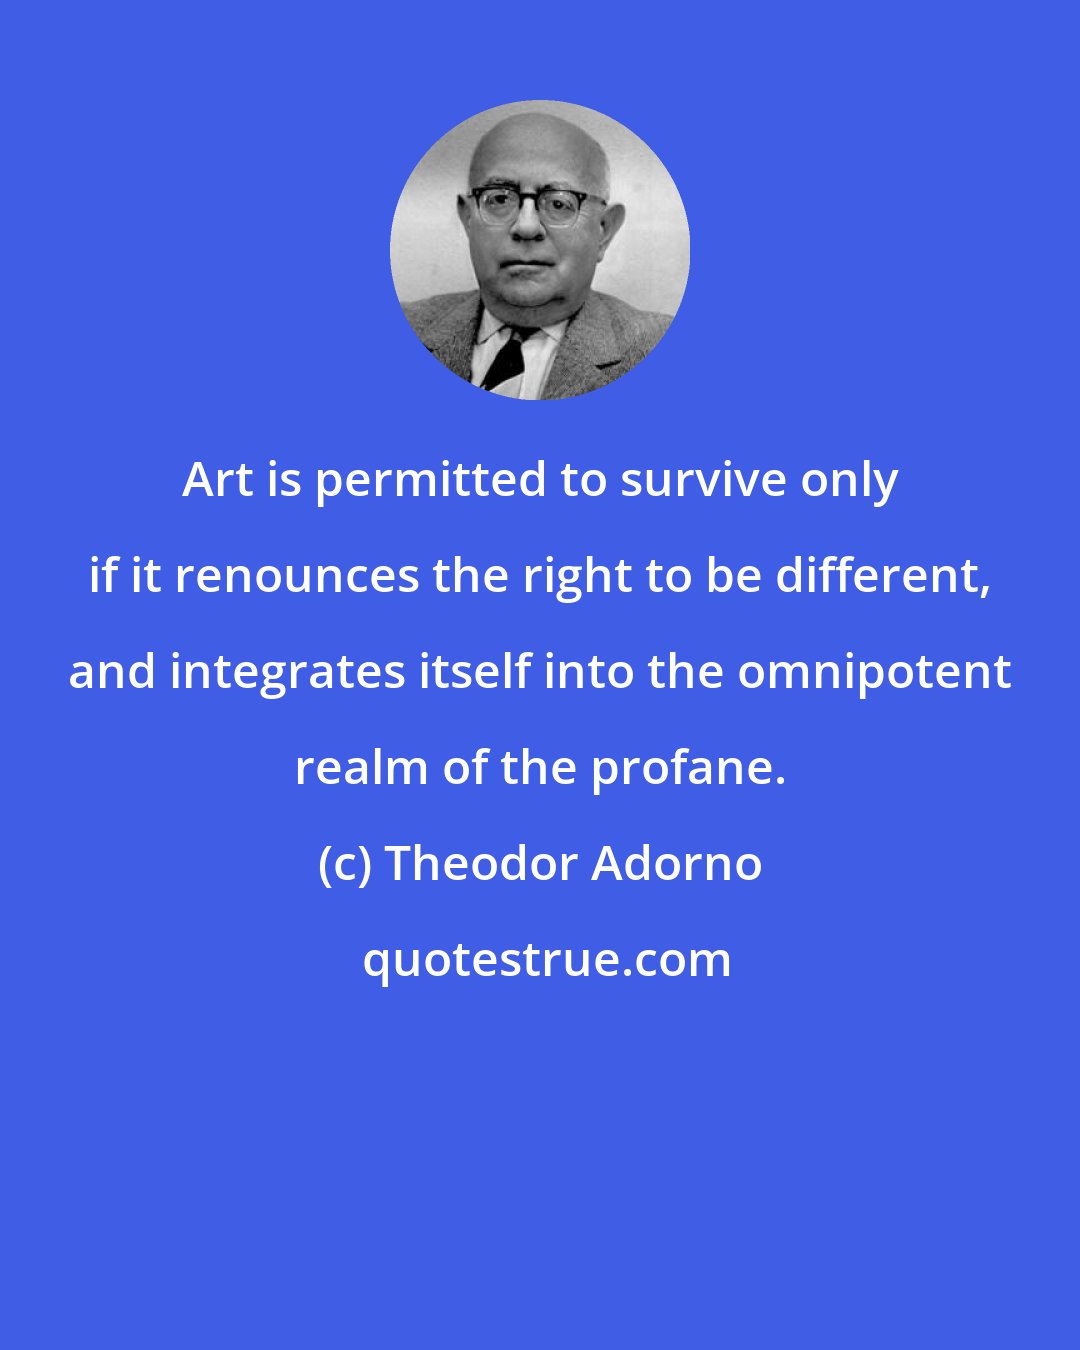 Theodor Adorno: Art is permitted to survive only if it renounces the right to be different, and integrates itself into the omnipotent realm of the profane.